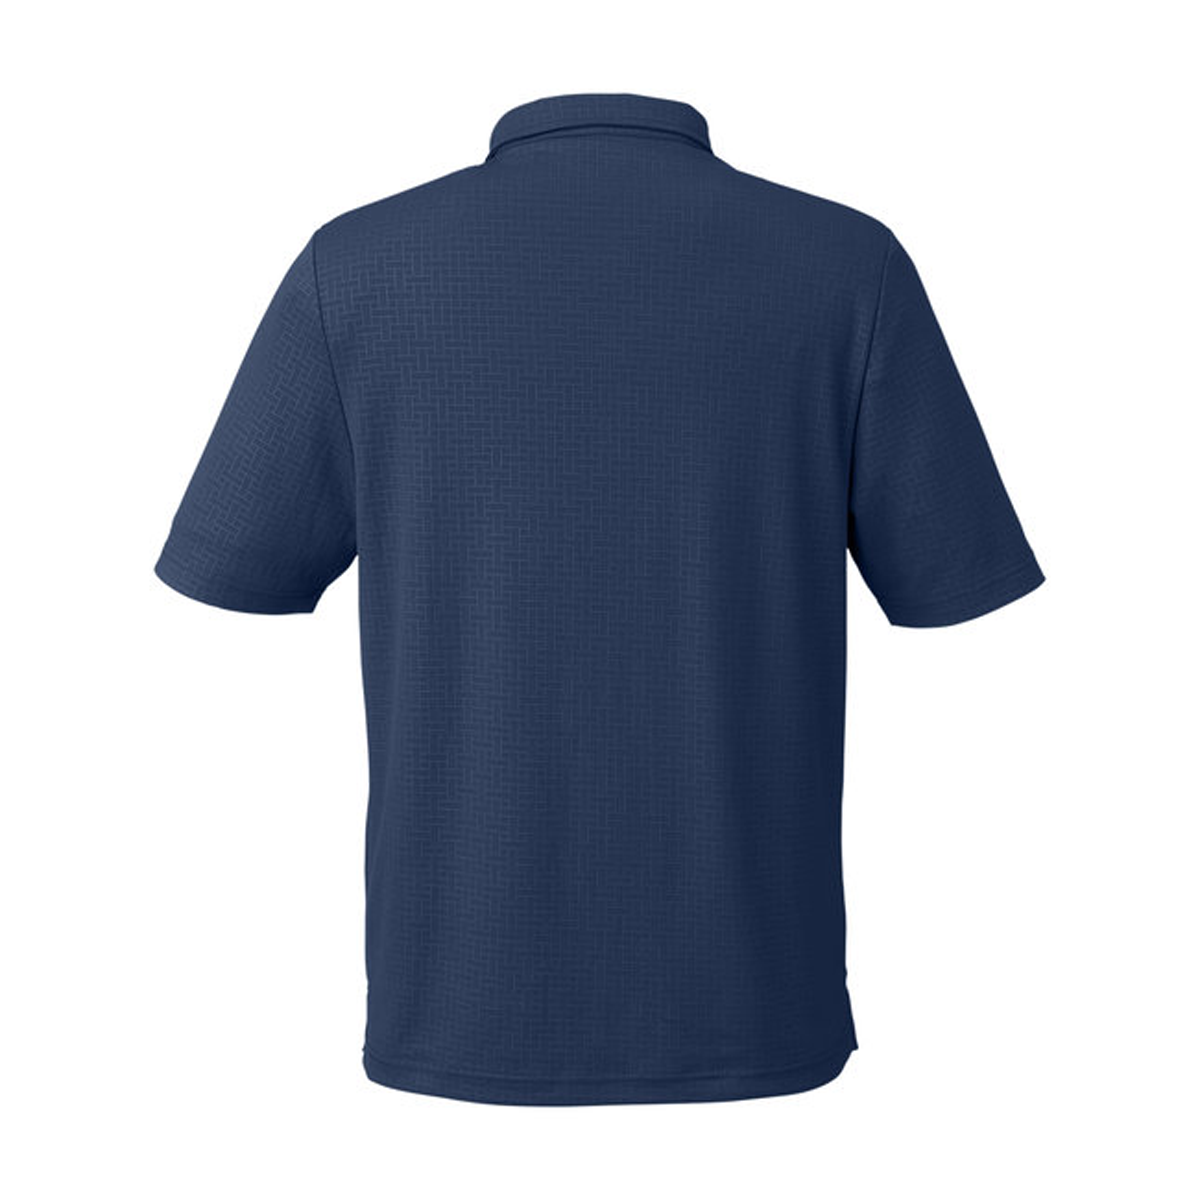 NORTH END MEN'S REPLAY RECYCLED POLO